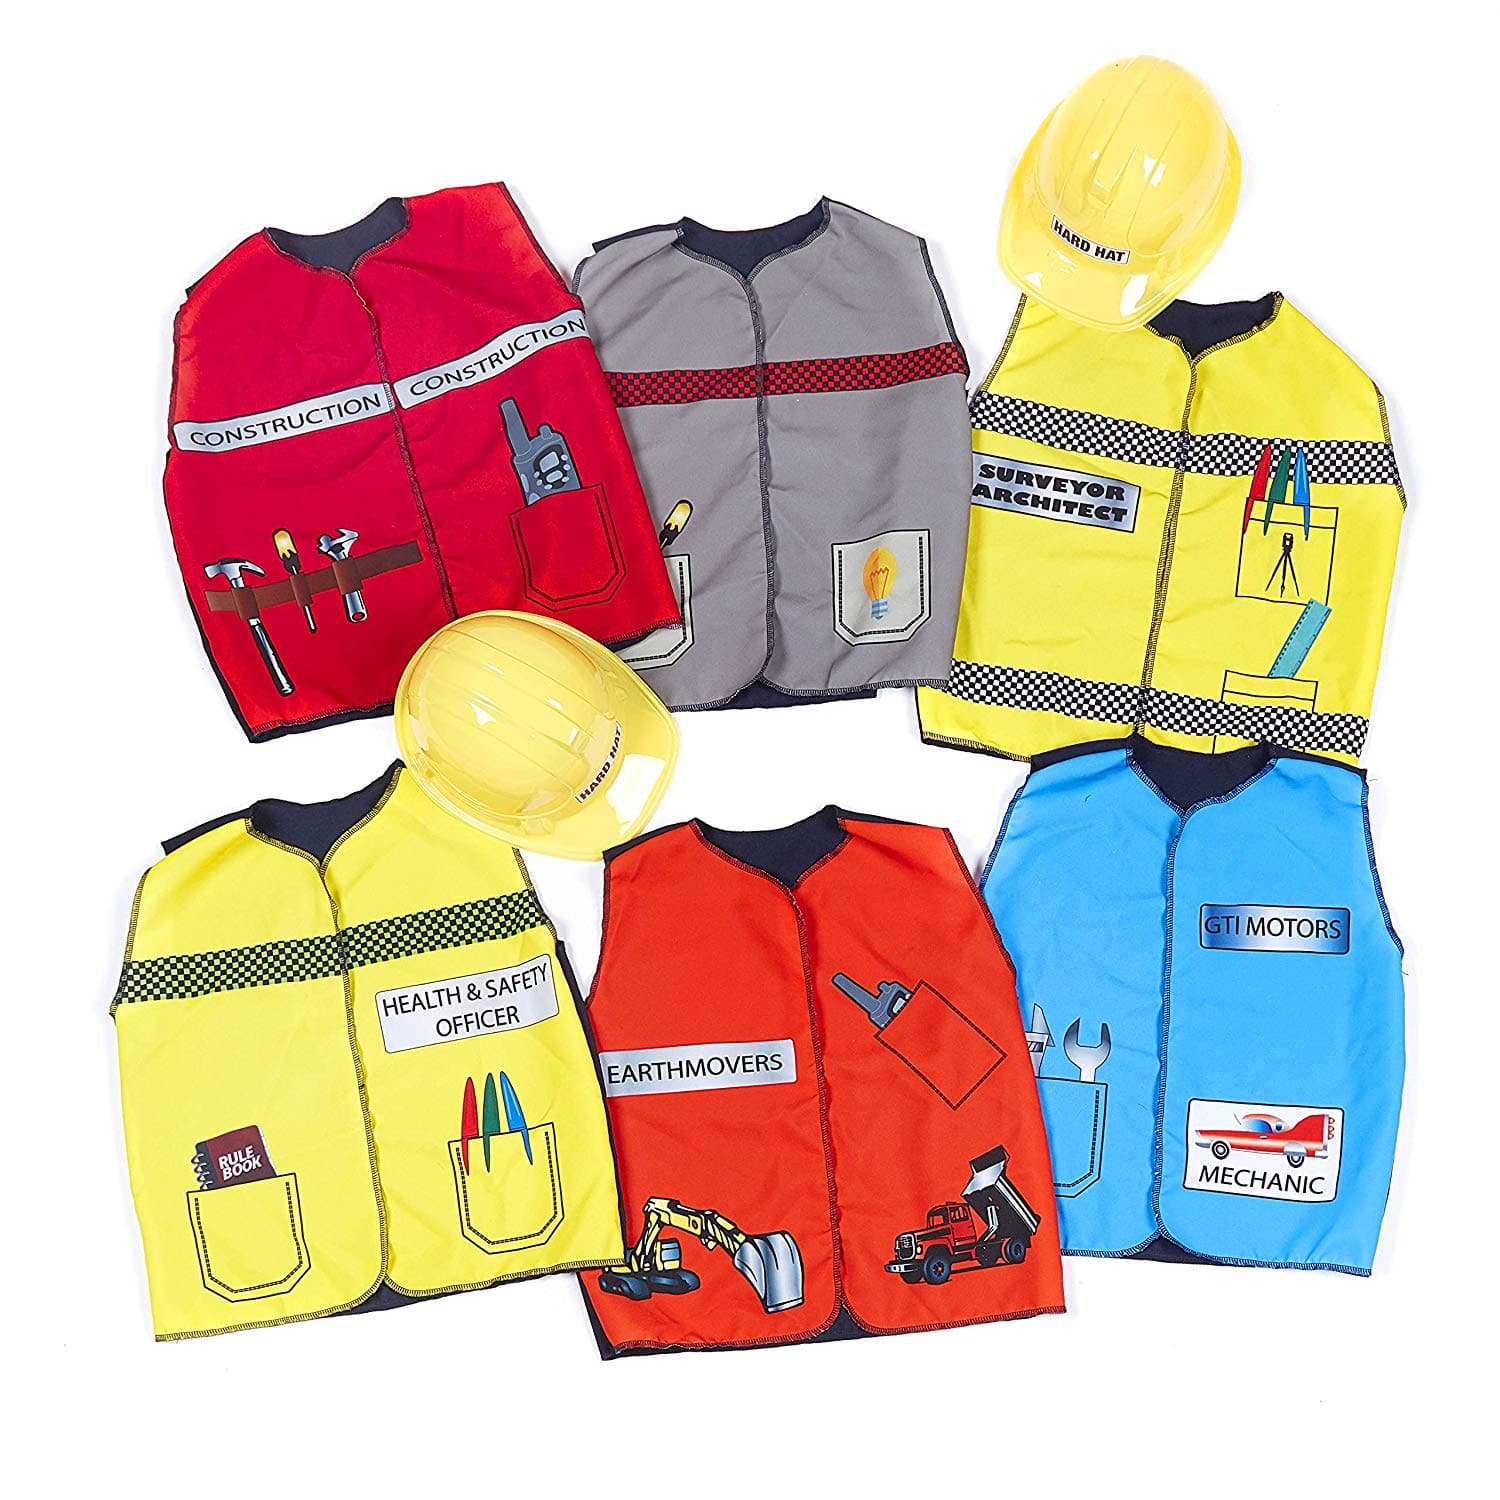 Construction Tabard and Hard Hat Set of 6, Introducing our Construction Tabard and Hard Hat Set of 6, the ideal addition to your dressing up box and role play area. This set includes tabards and hard hats, providing children with everything they need to become a construction worker and embark on exciting imaginary adventures.Unleash your child's creativity and imagination as they dress up and immerse themselves in the world of construction. With this set, they can build skyscrapers, repair roads, or constru